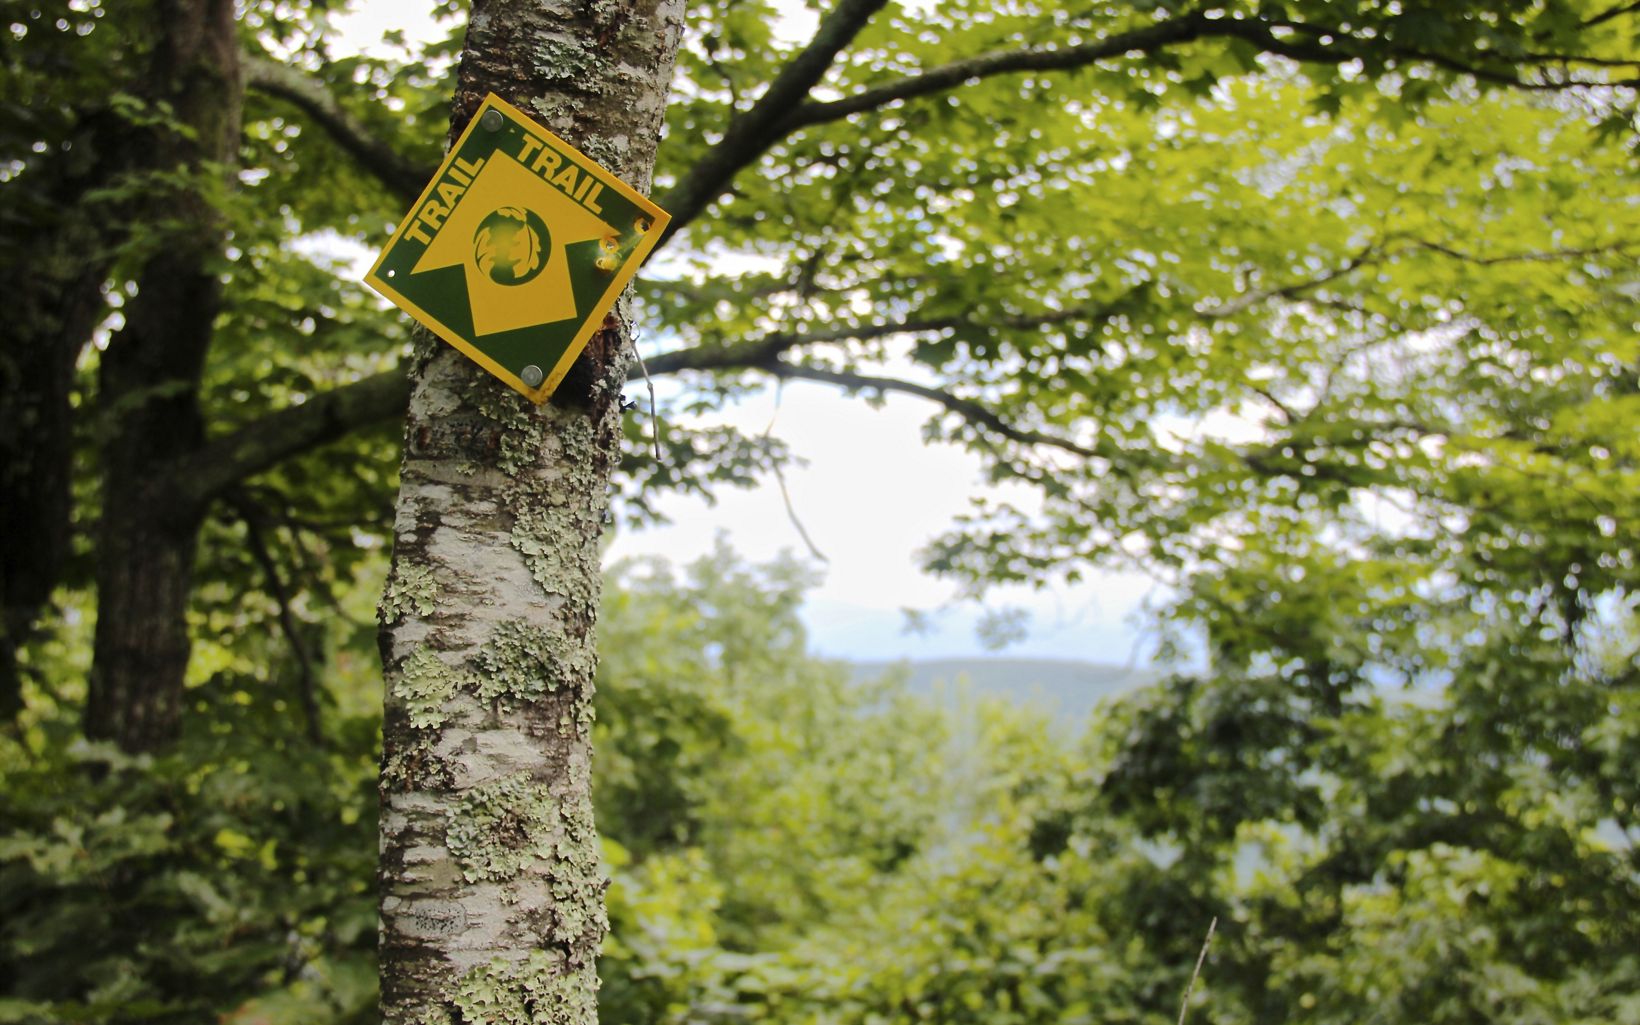 A yellow and green trail blaze is nailed to a moss covered tree trunk. A mountain ridge is visible in the distance through an opening in the leaves.